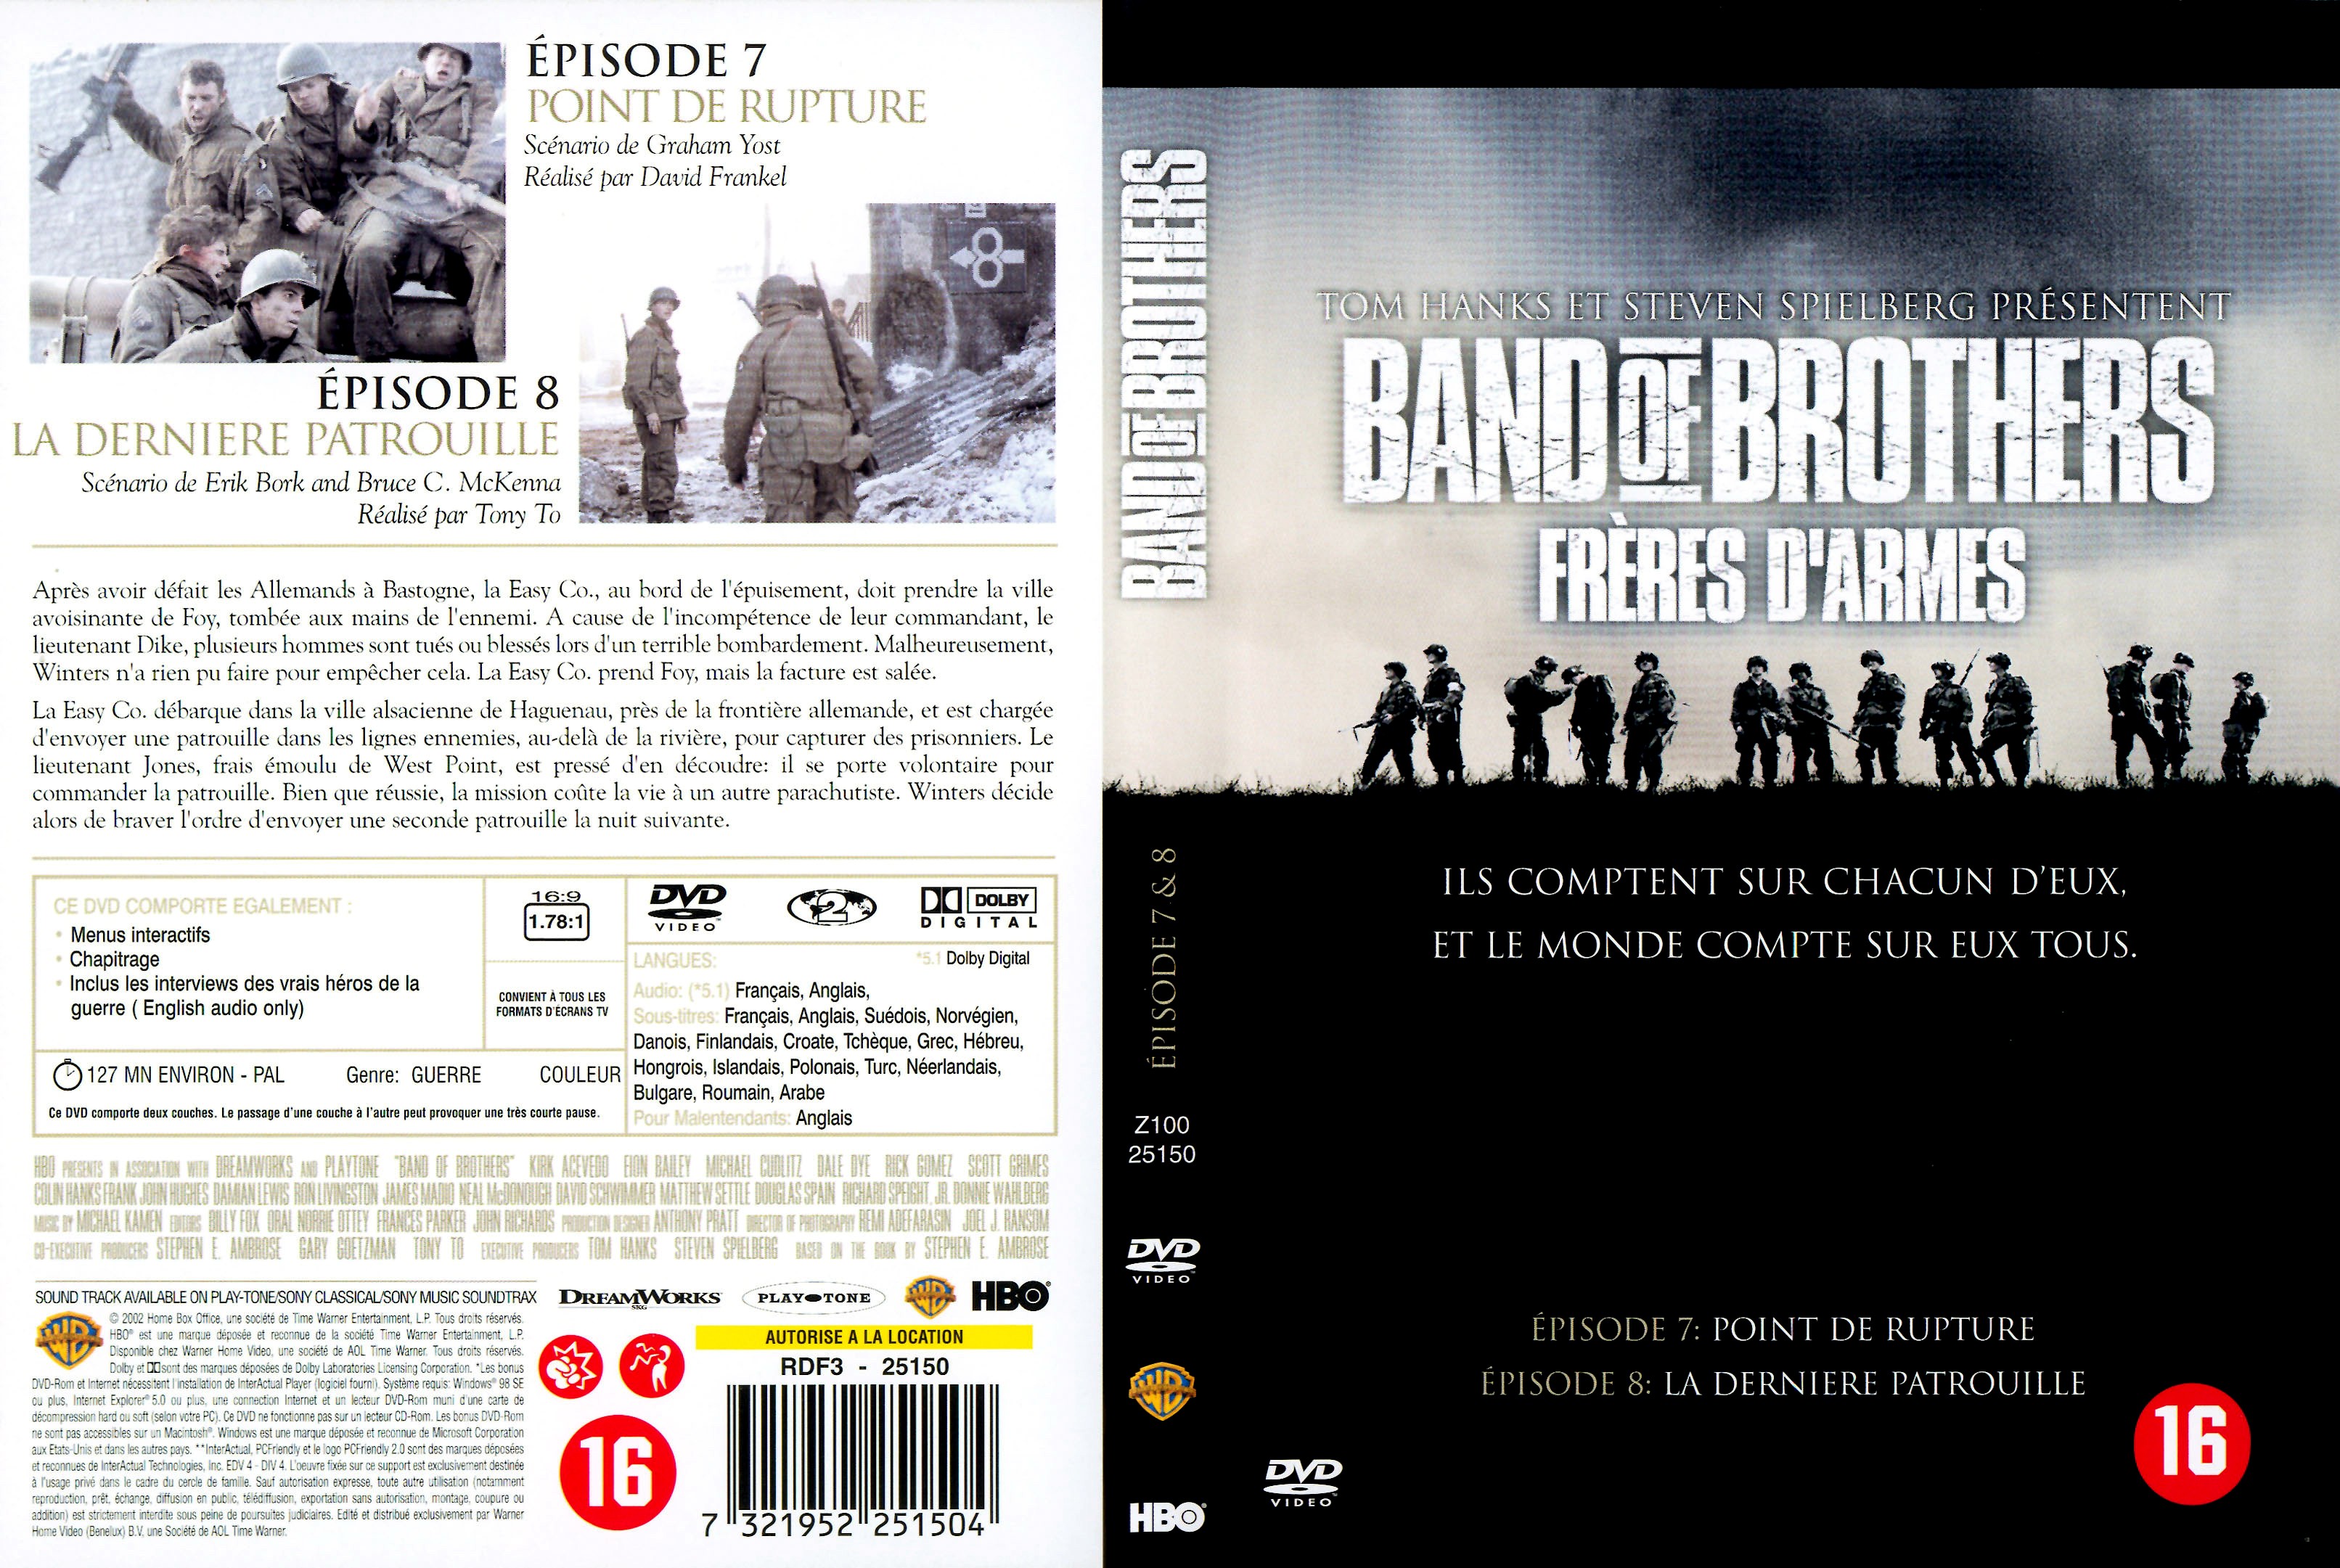 Jaquette DVD Band of brothers vol 4